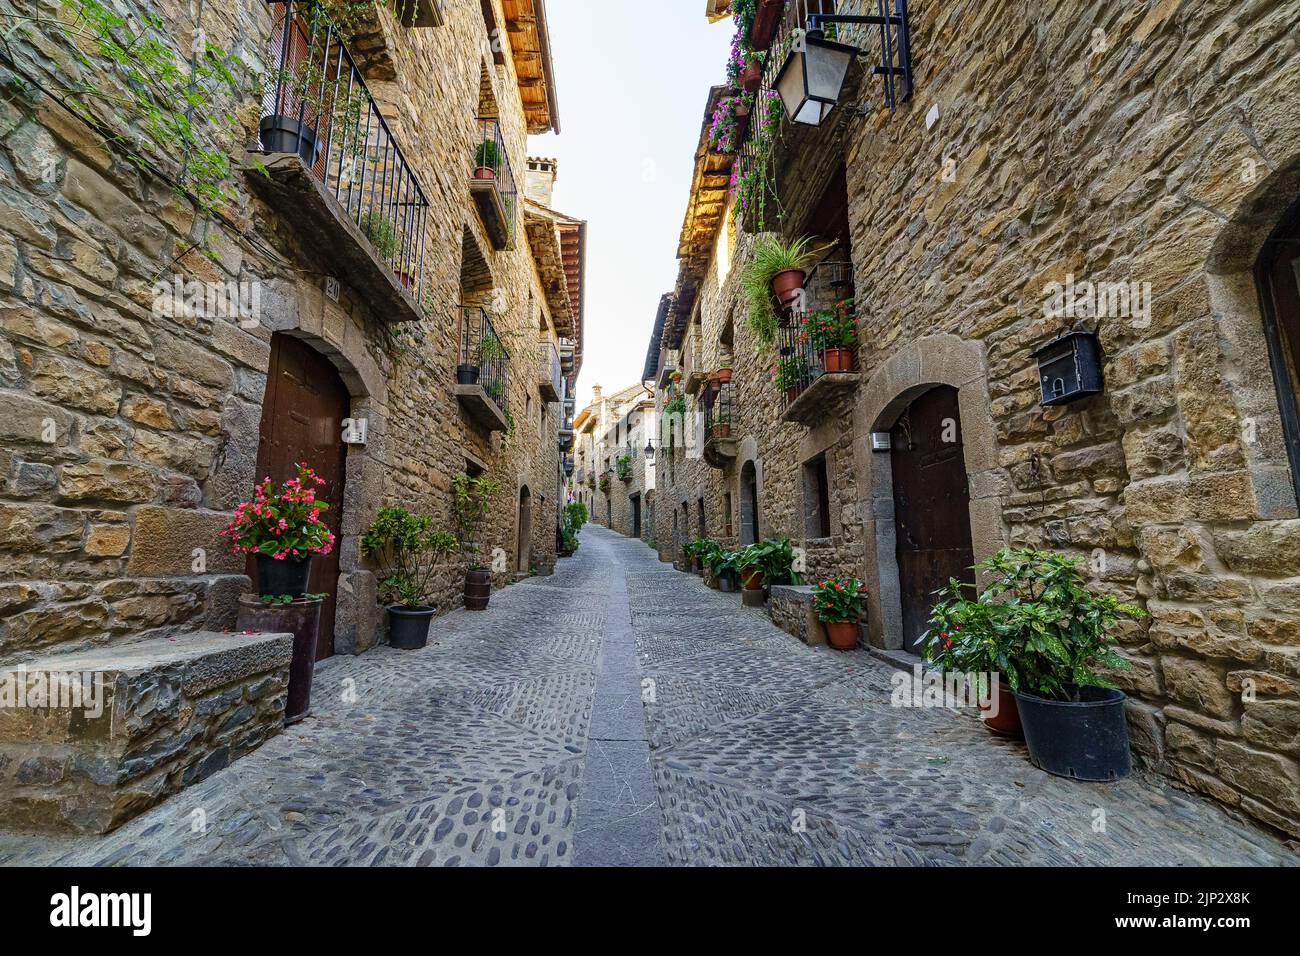 Street of an old medieval town with stone houses and cobbled floors, street lamps and an atmosphere of bygone times. Ainsa, Spain. Stock Photo